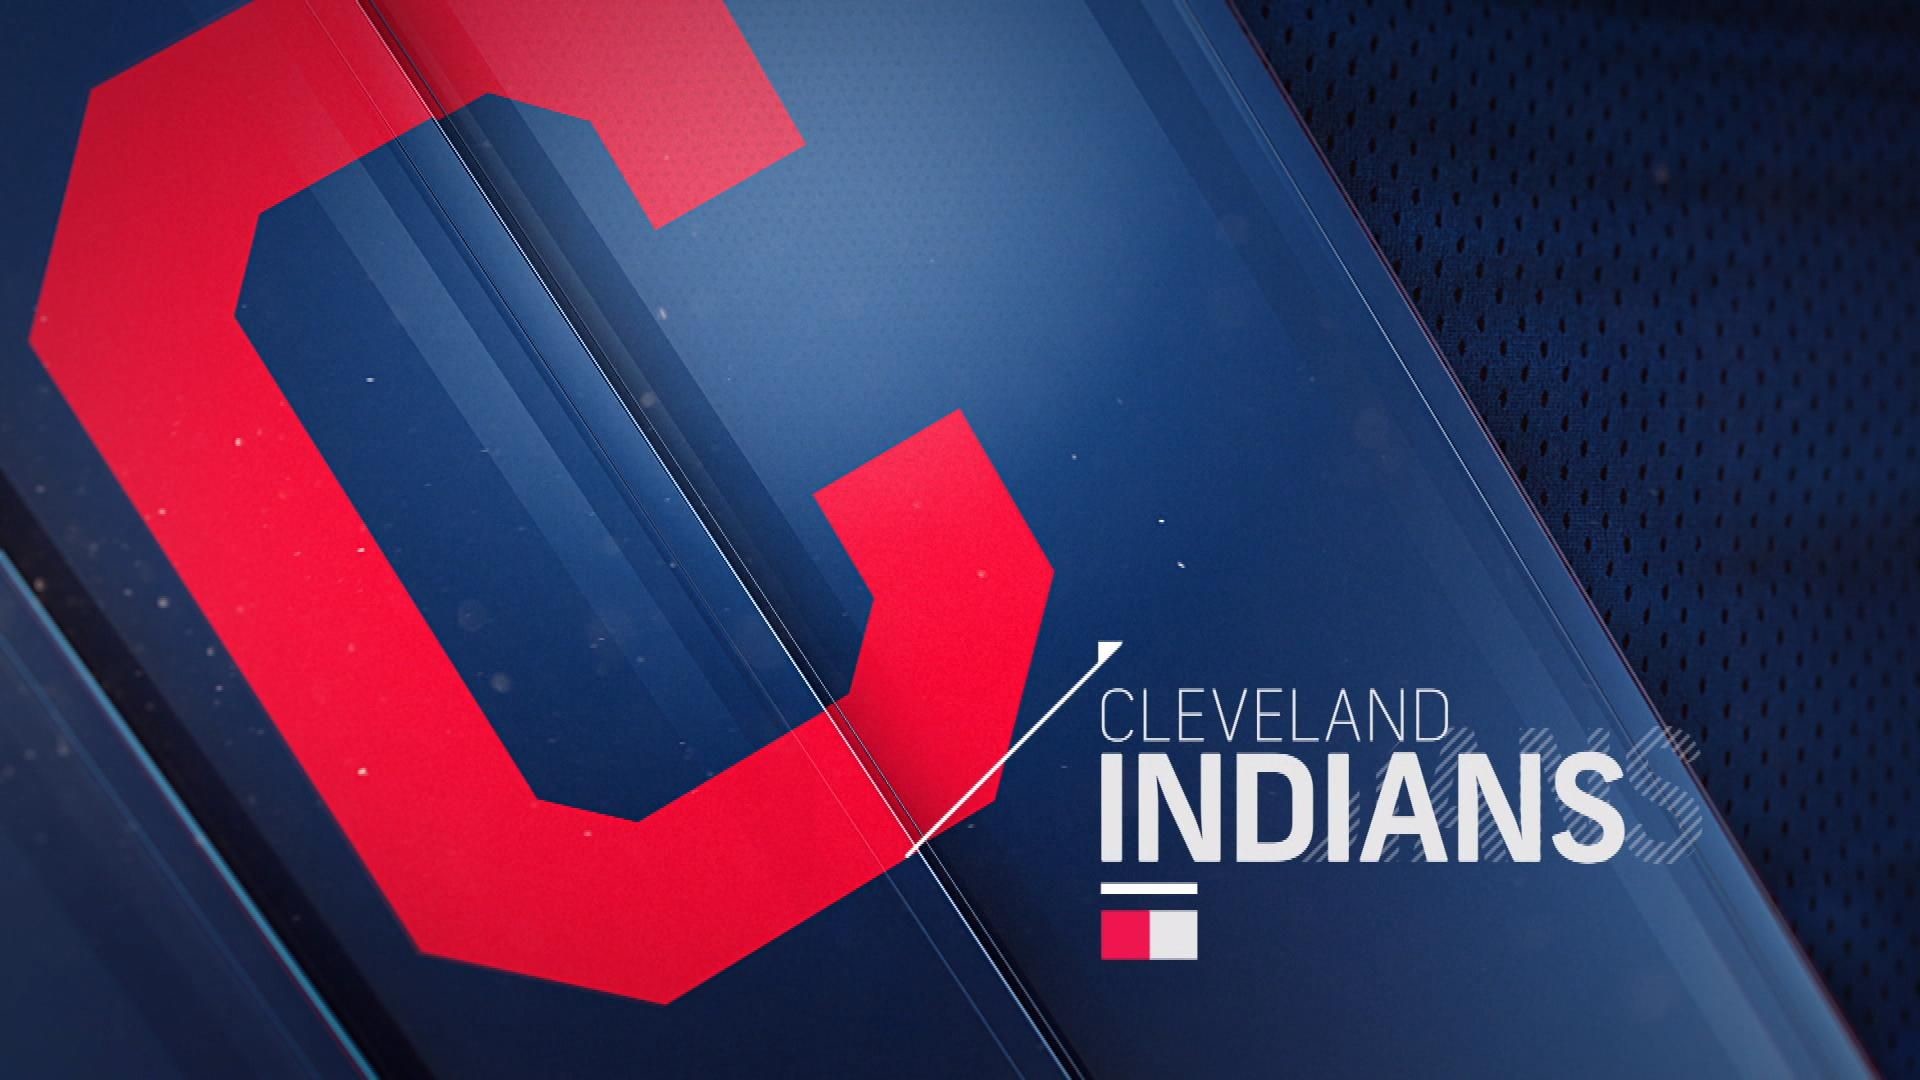 Count Down to OPENING DAY  Cleveland indians baseball Cleveland indians  logo Cleveland indians